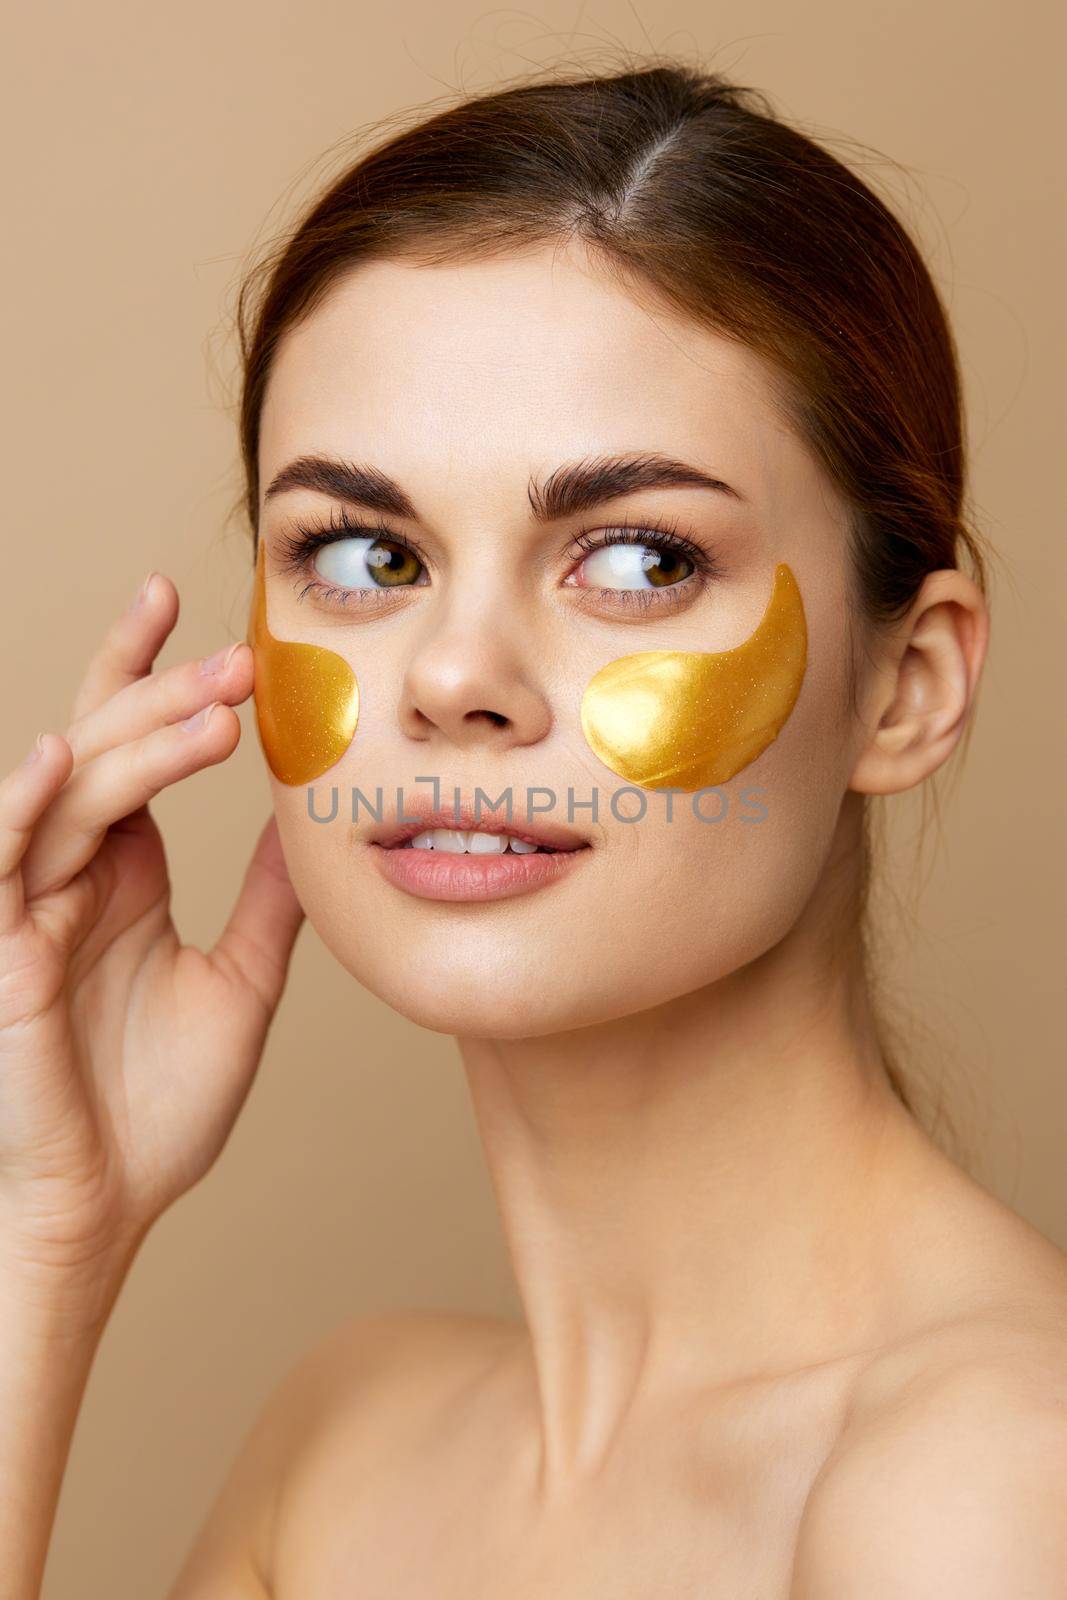 pretty woman golden patches clean skin smile posing close-up Lifestyle. High quality photo